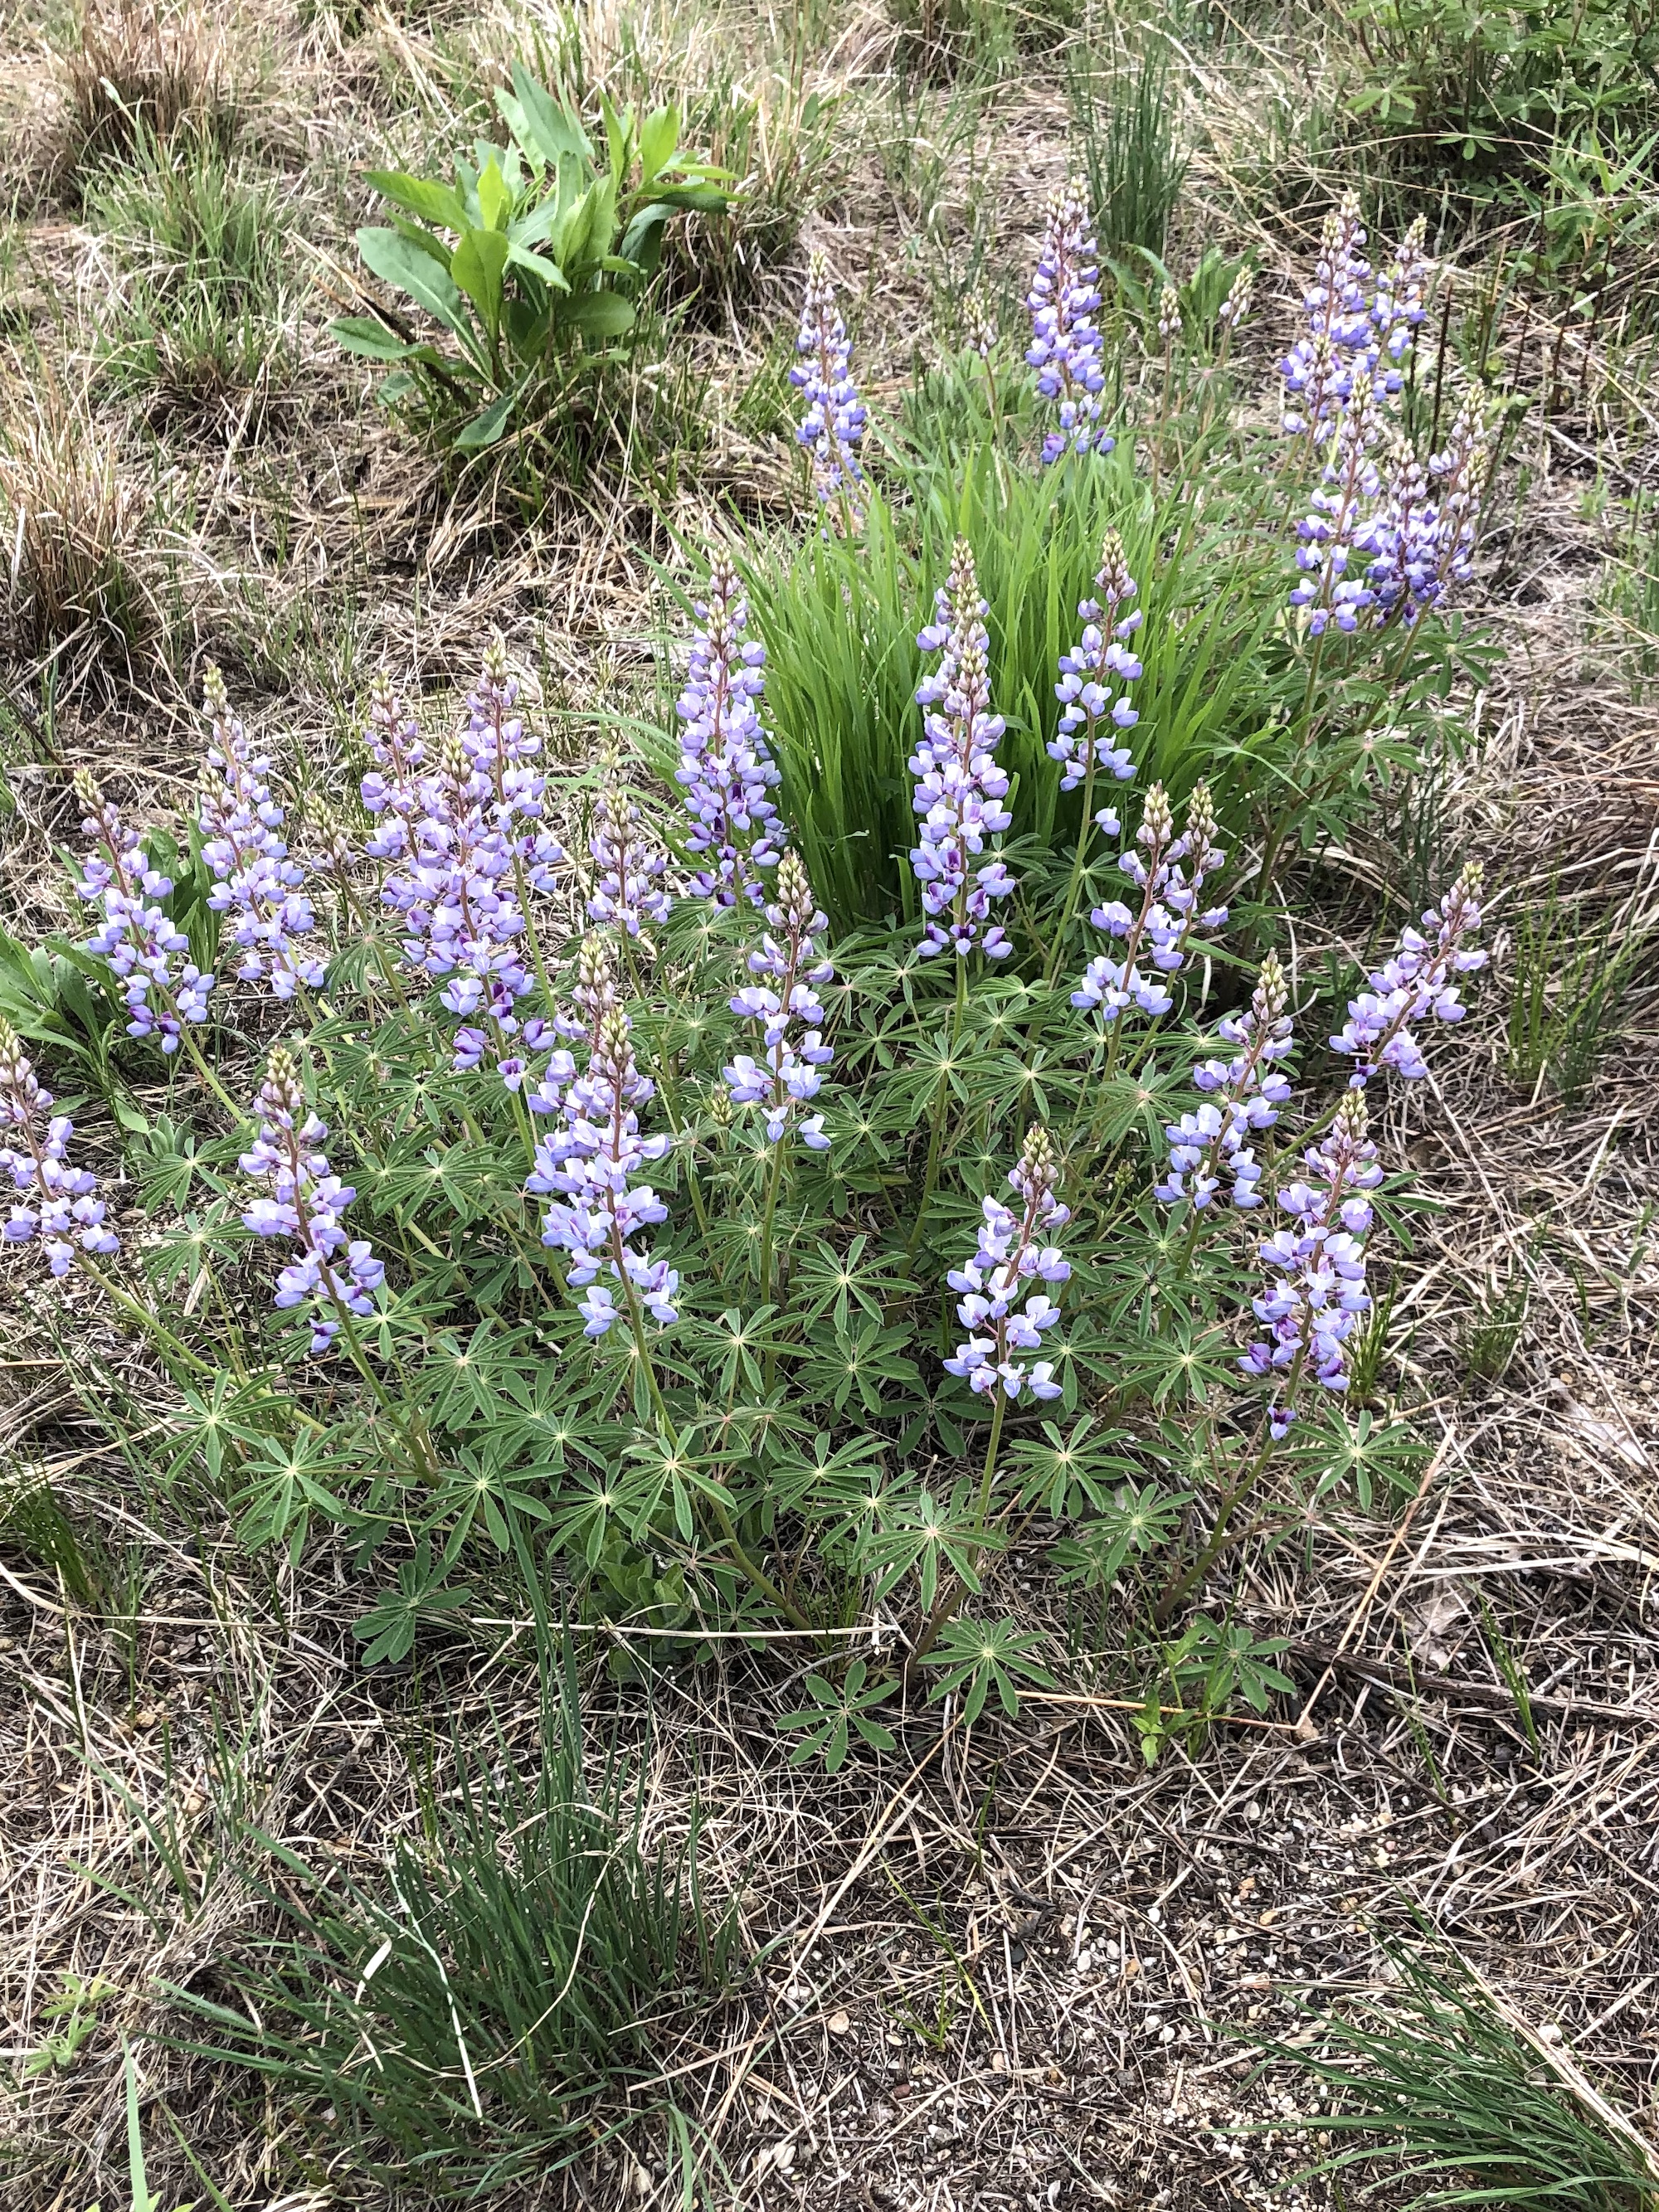 Wild Lupine next to the UW-Madison Arboretum Visitor Center in  Madison, Wisconsin on May 17, 2022.